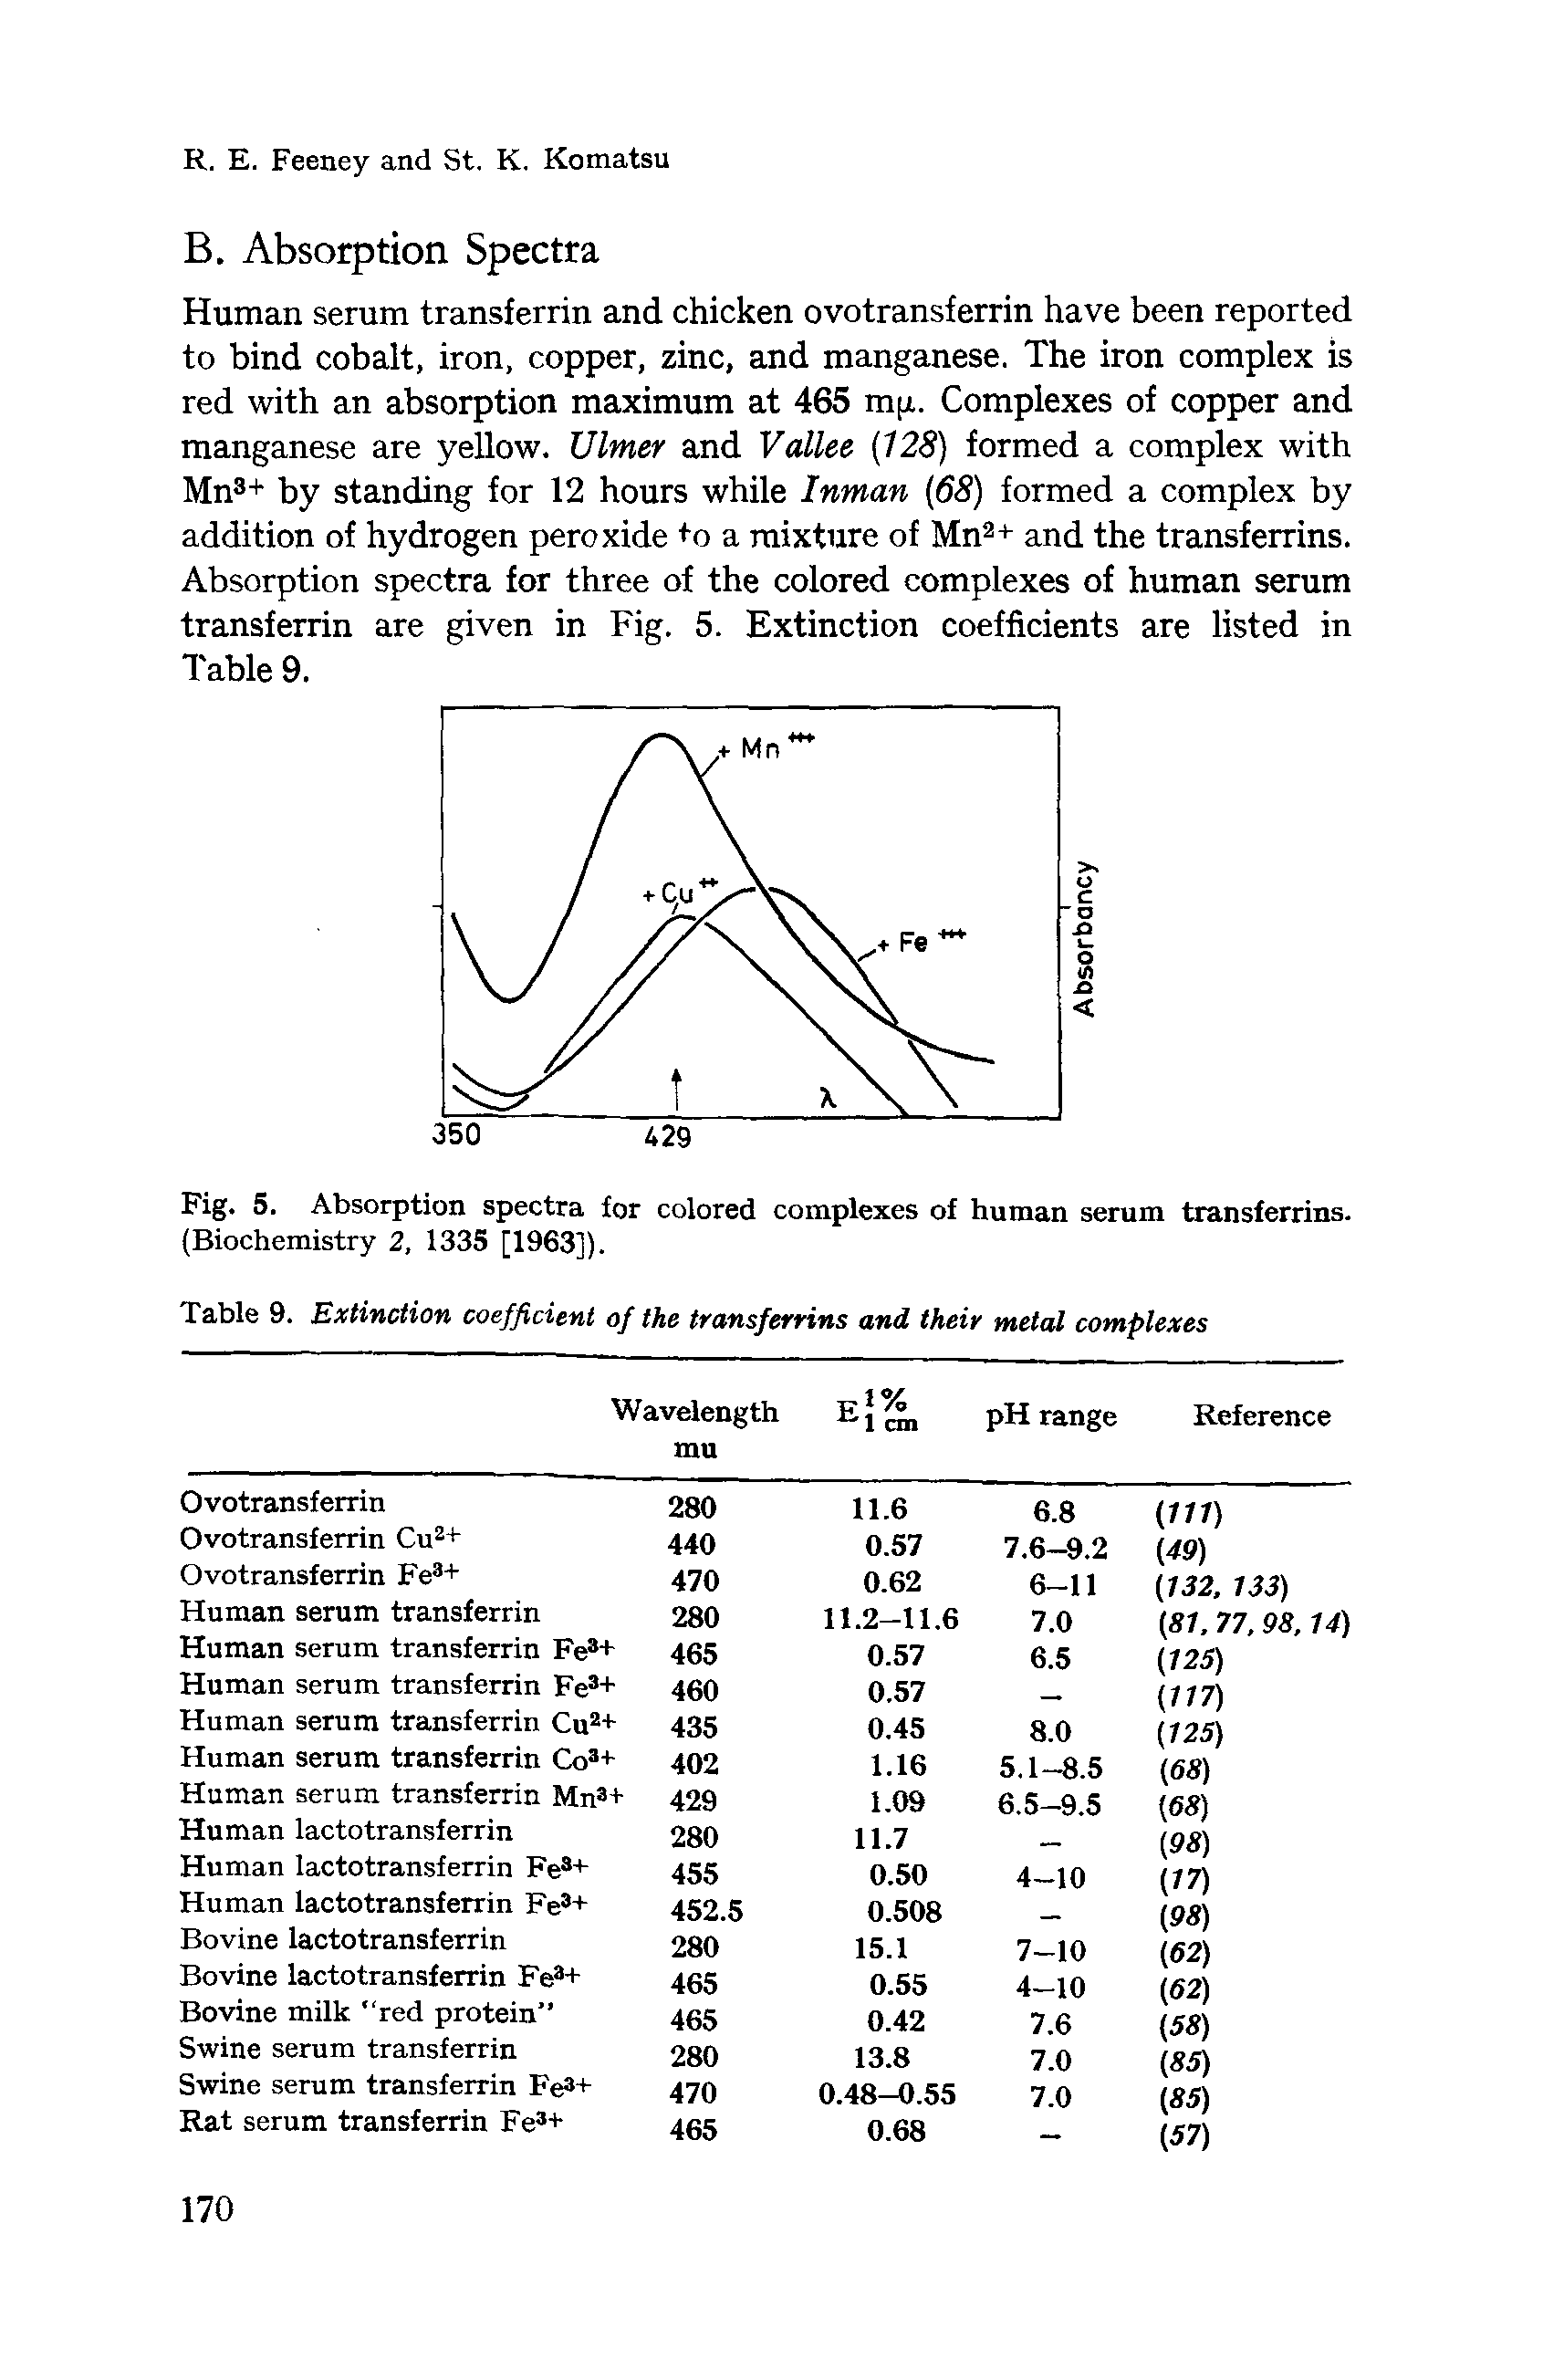 Fig. 5. Absorption spectra for colored complexes of human serum transferrins. (Biochemistry 2, 1335 [1963]).